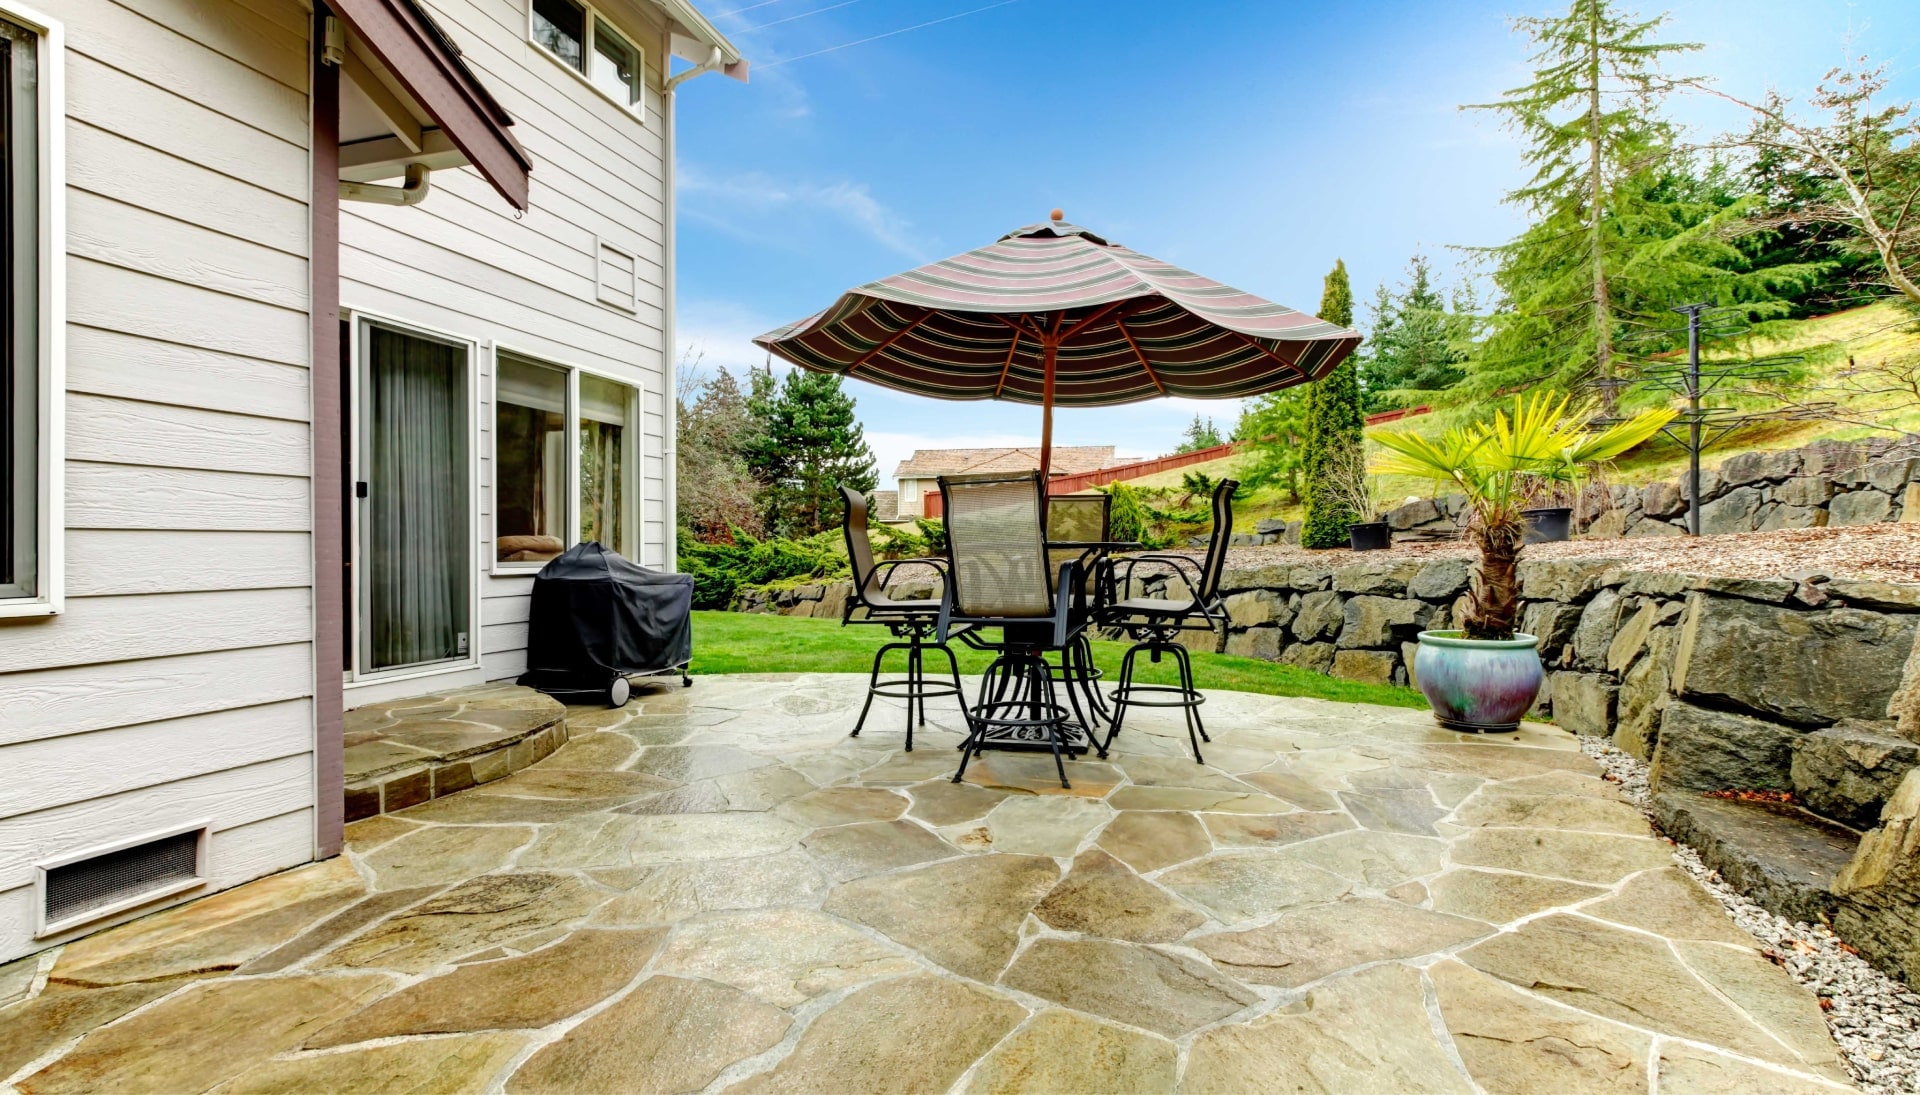 Create an Outdoor Oasis with Stunning Concrete Patio in Racine, WI - Enjoy Beautifully Textured and Patterned Concrete Surfaces for Your Entertaining and Relaxation Needs.